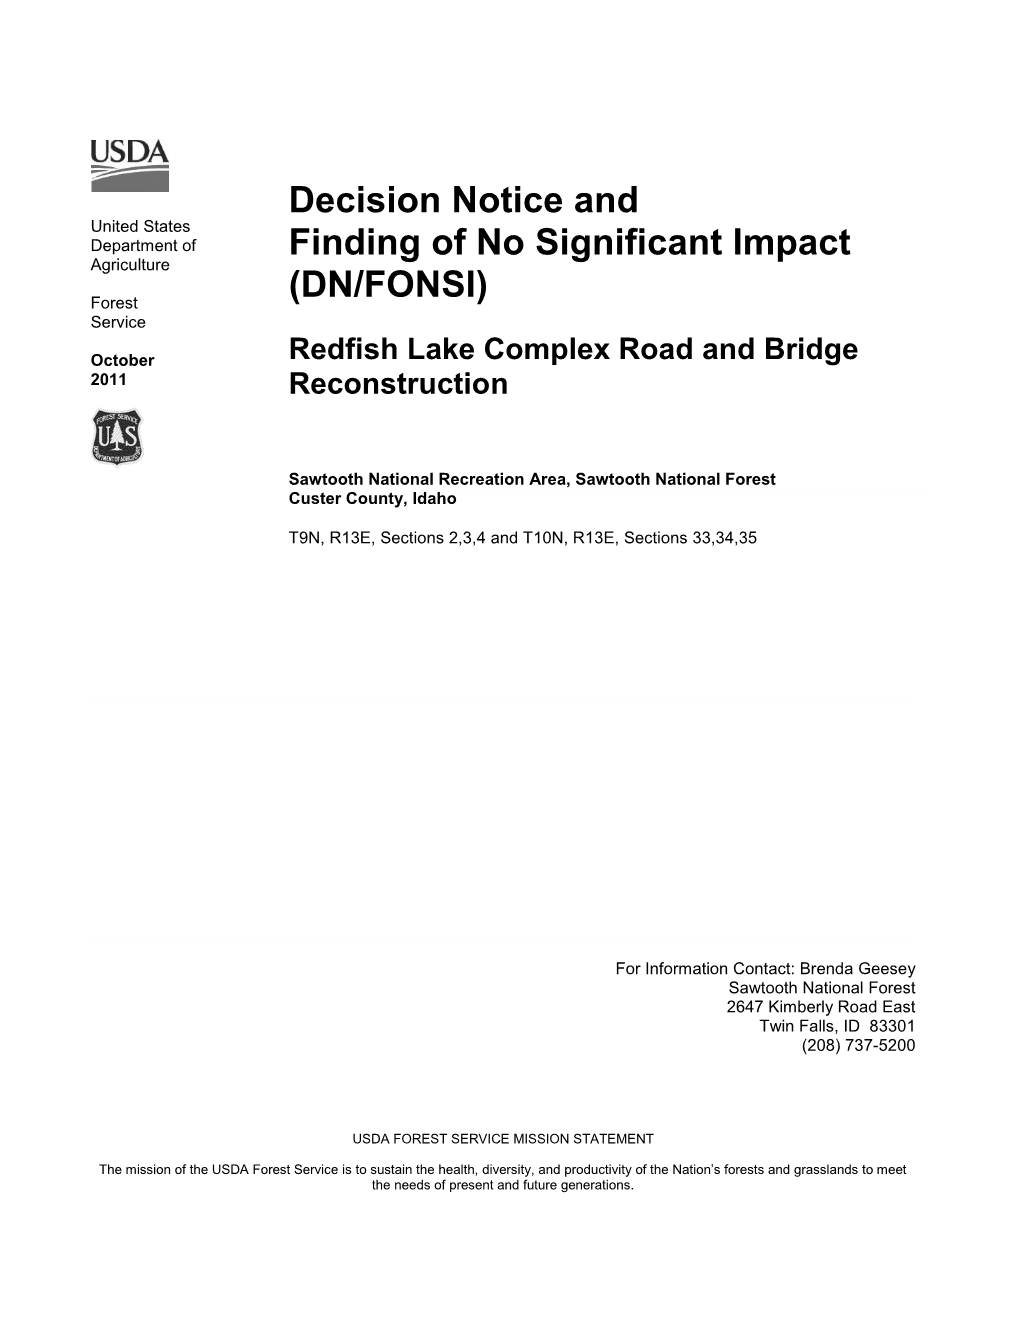 Decision Notice and Finding of No Significant Impact for the Redfish Lake Complex Road and Bridge Reconstruction Project Are Presented Here